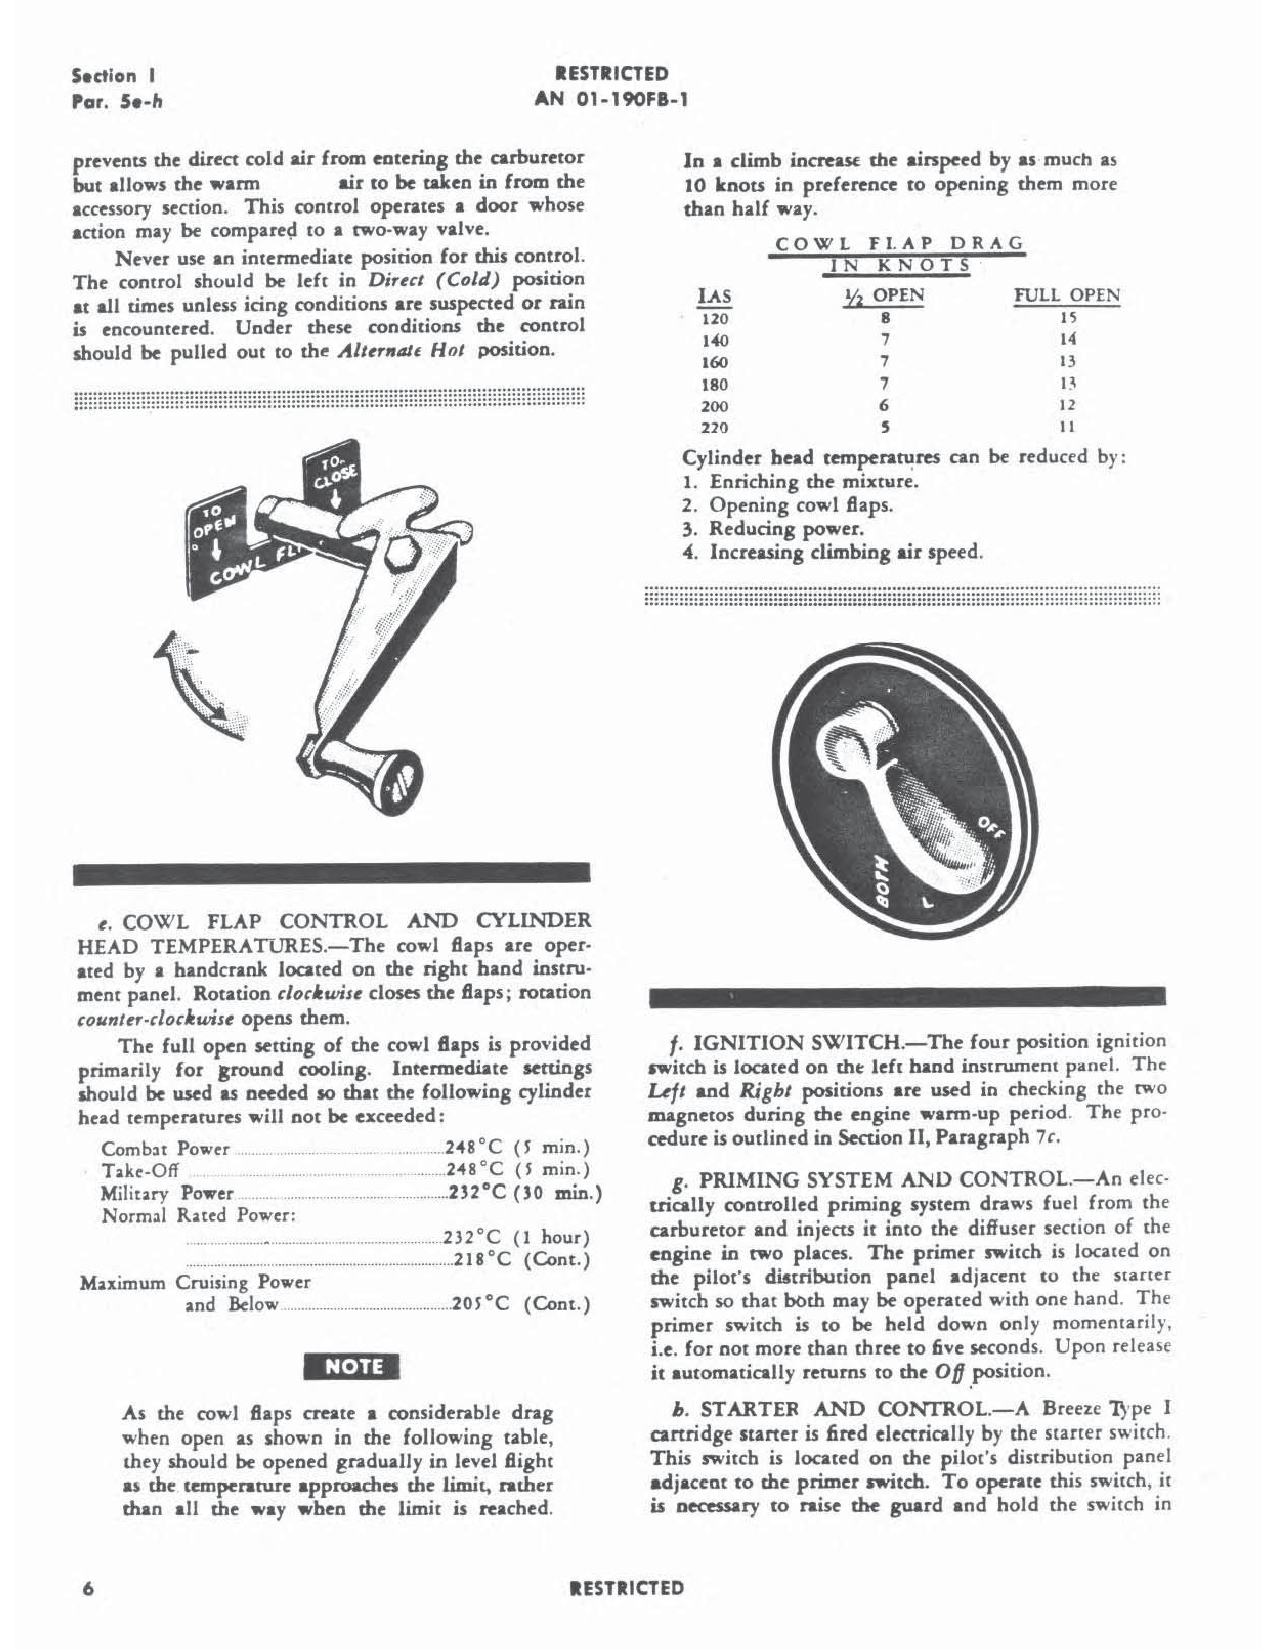 Sample page 8 from AirCorps Library document: Pilot's Handbook of Flight Operating Instructions - FM-2